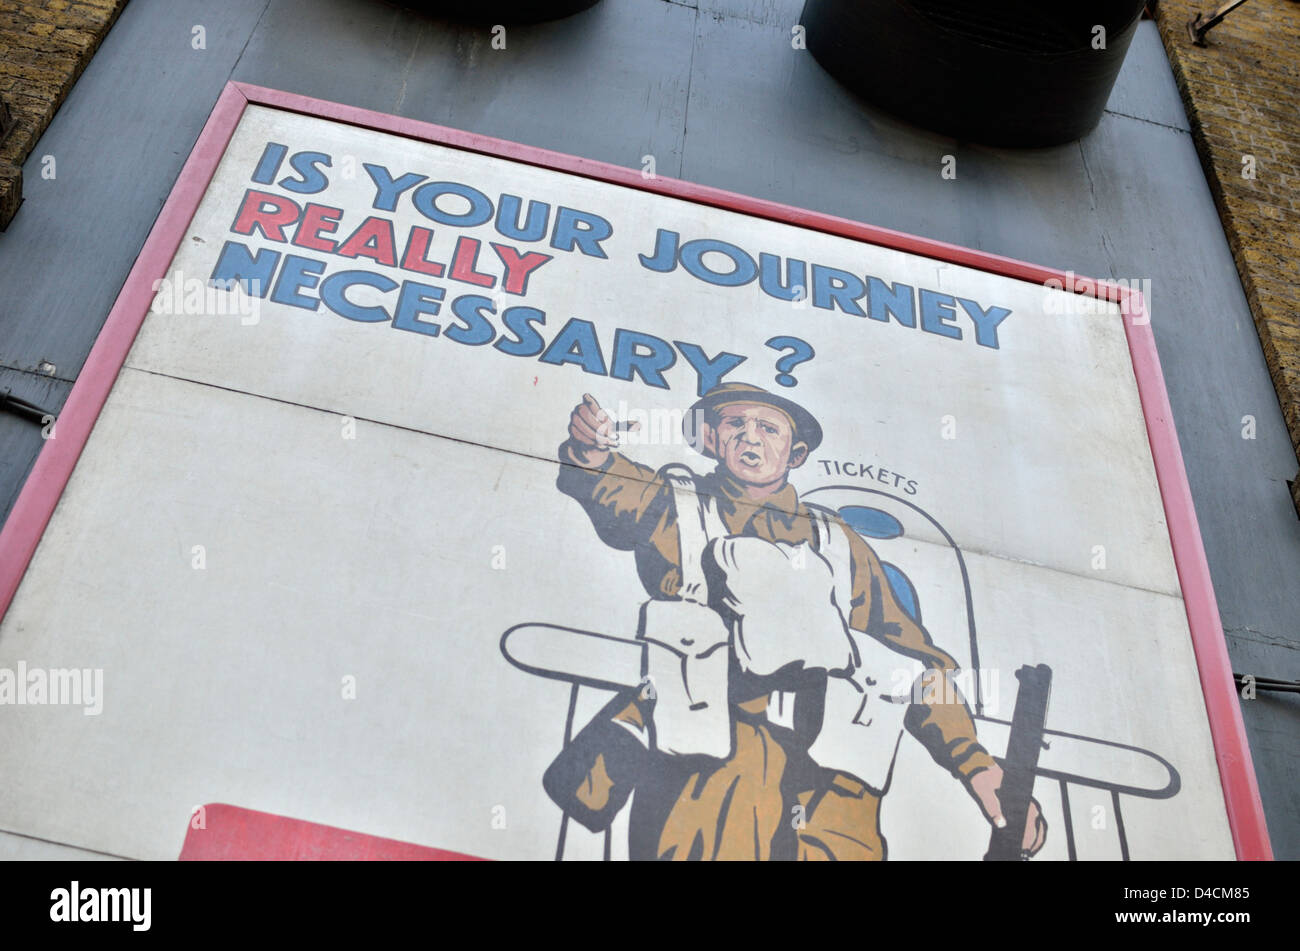 'Is Your Journey Really Necessary' Second World War poster, London, UK. Stock Photo